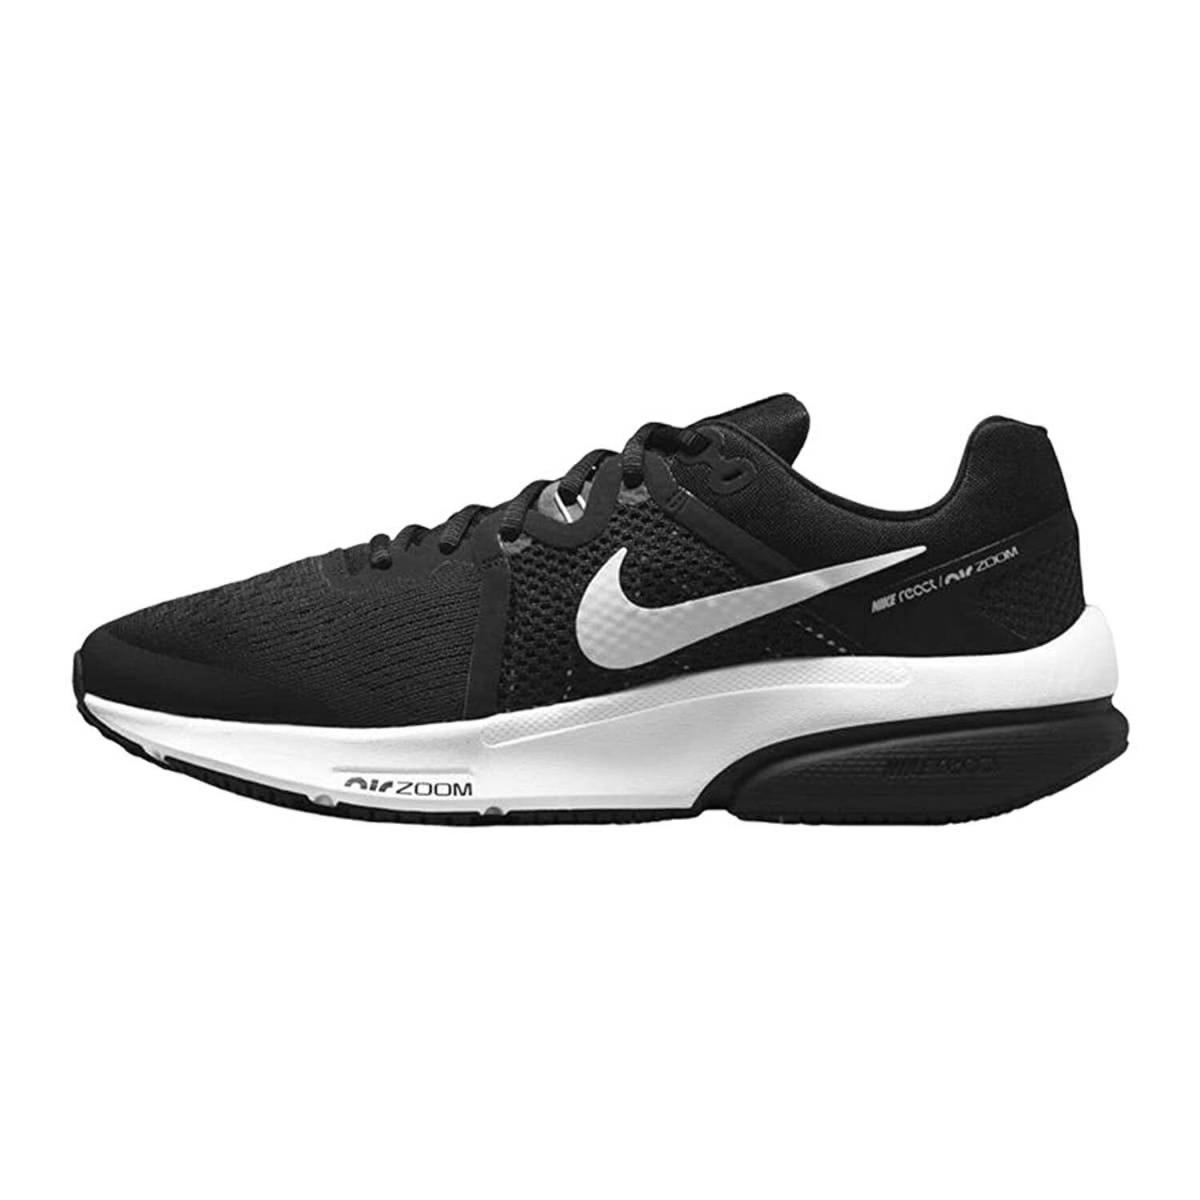 Nike Men`s Zoom Prevail Running Shoes DA1102 001 Size 10.5 US